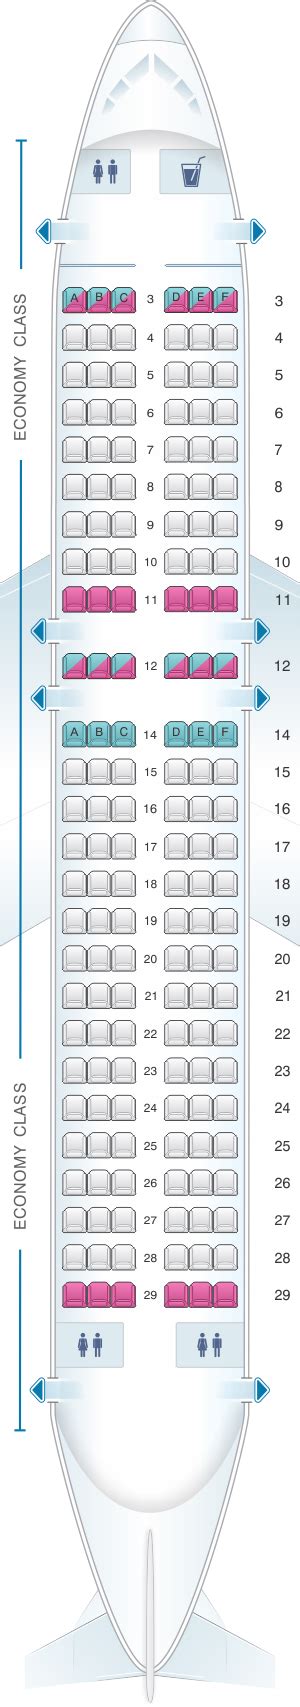 Airbus A319 Seating